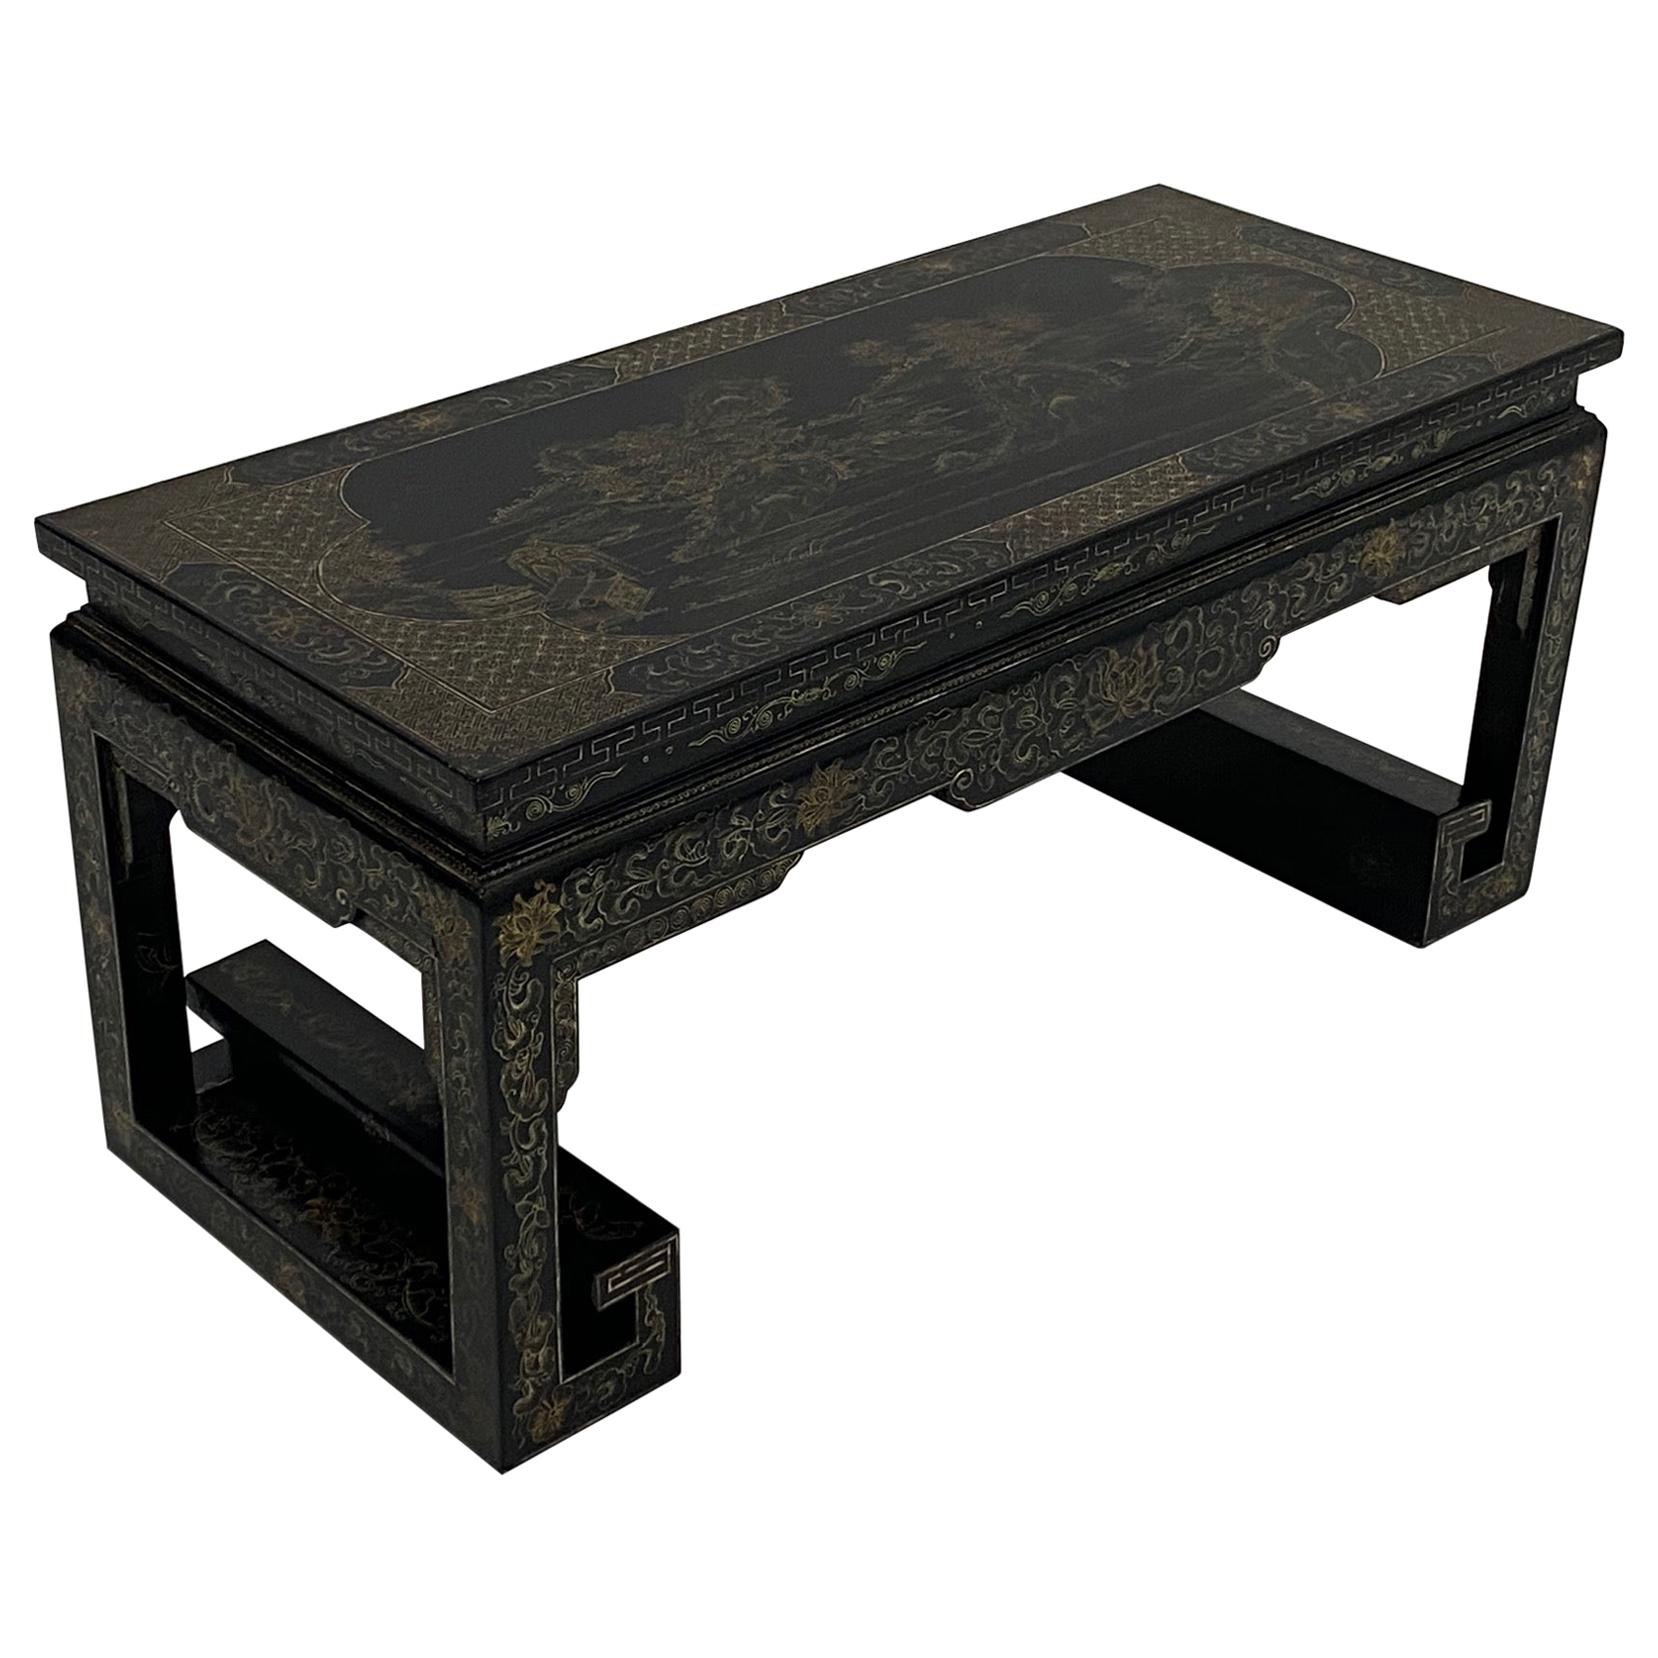 Beautifully Shaped and Decorated Chinese Lacquer Table For Sale